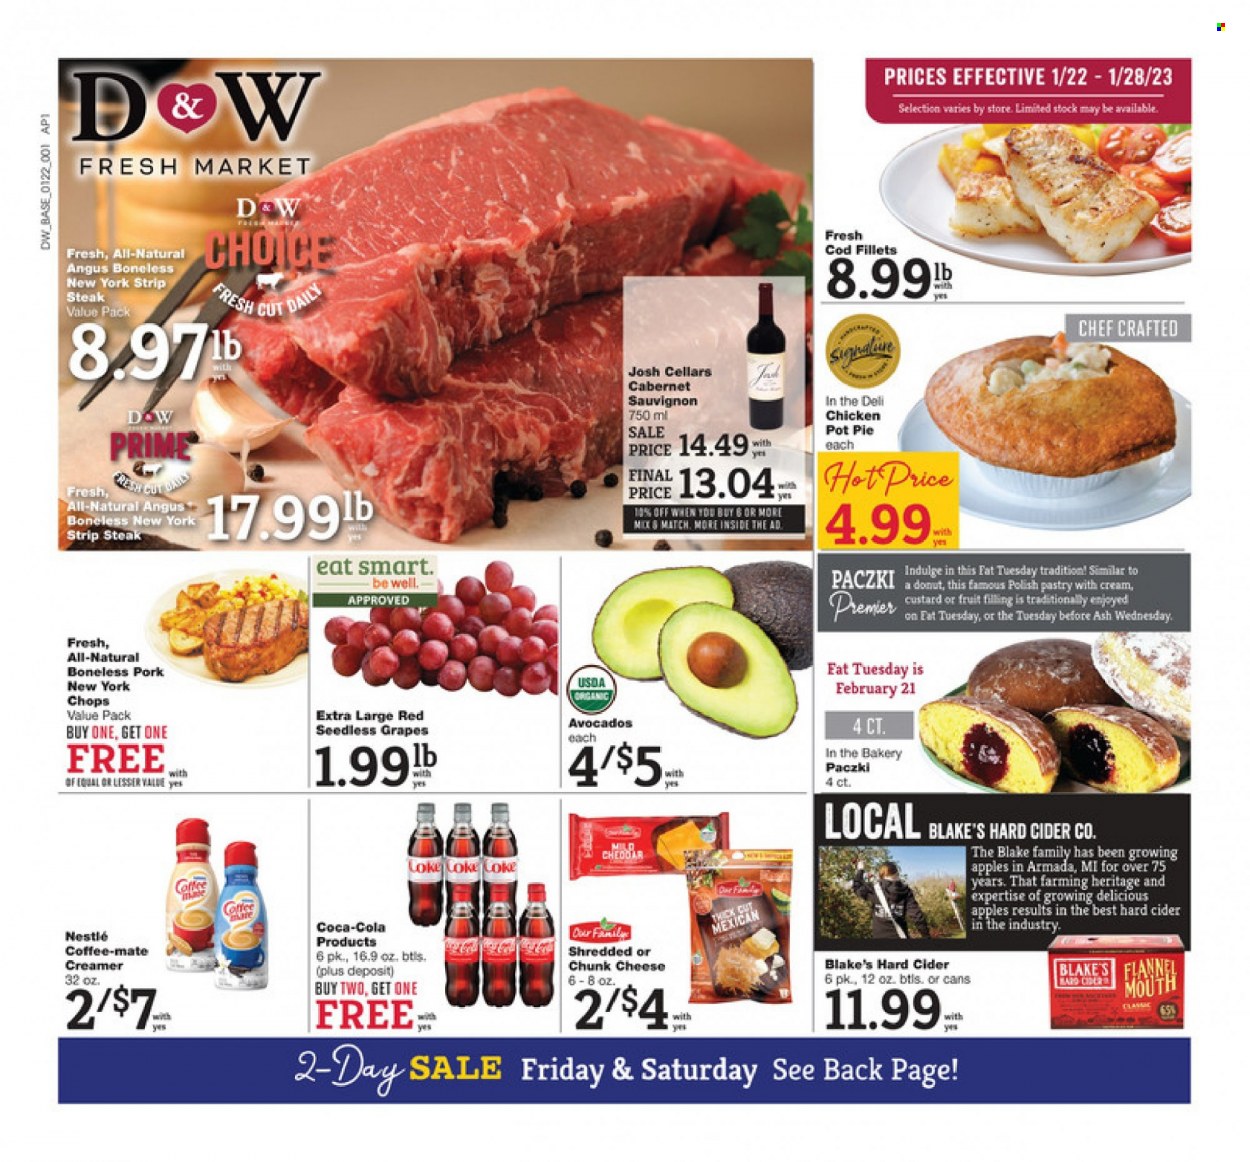 thumbnail - D&W Fresh Market Flyer - 01/22/2023 - 01/28/2023 - Sales products - pie, pot pie, donut, paczki, apples, avocado, grapes, seedless grapes, cod, mild cheddar, cheddar, cheese, chunk cheese, custard, Coffee-Mate, creamer, Nestlé, Coca-Cola, Cabernet Sauvignon, red wine, wine, cider, beef meat, steak, striploin steak. Page 1.